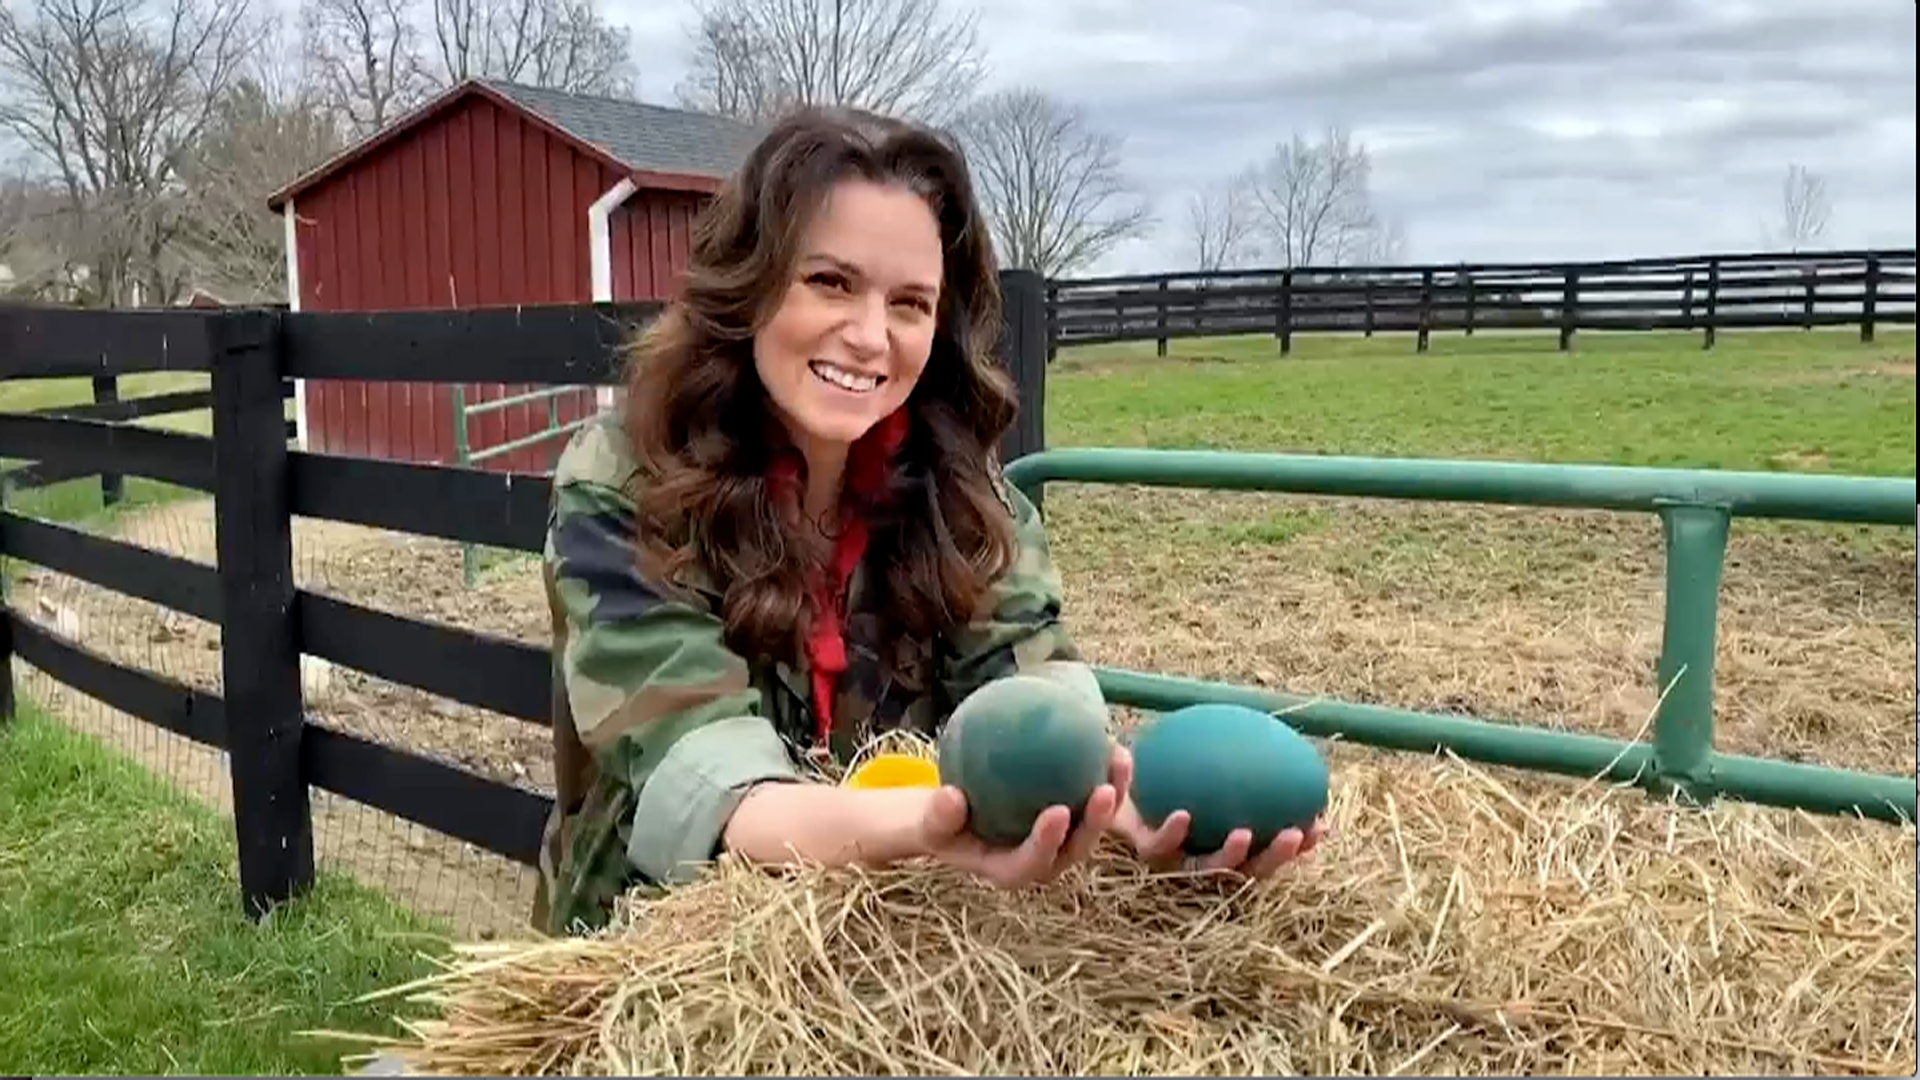 Friday Night In With the Morgans Episode 3 Clip: Mischief Farm, The Morgans offer viewers a video tour of their farm and the many animals that call it home.